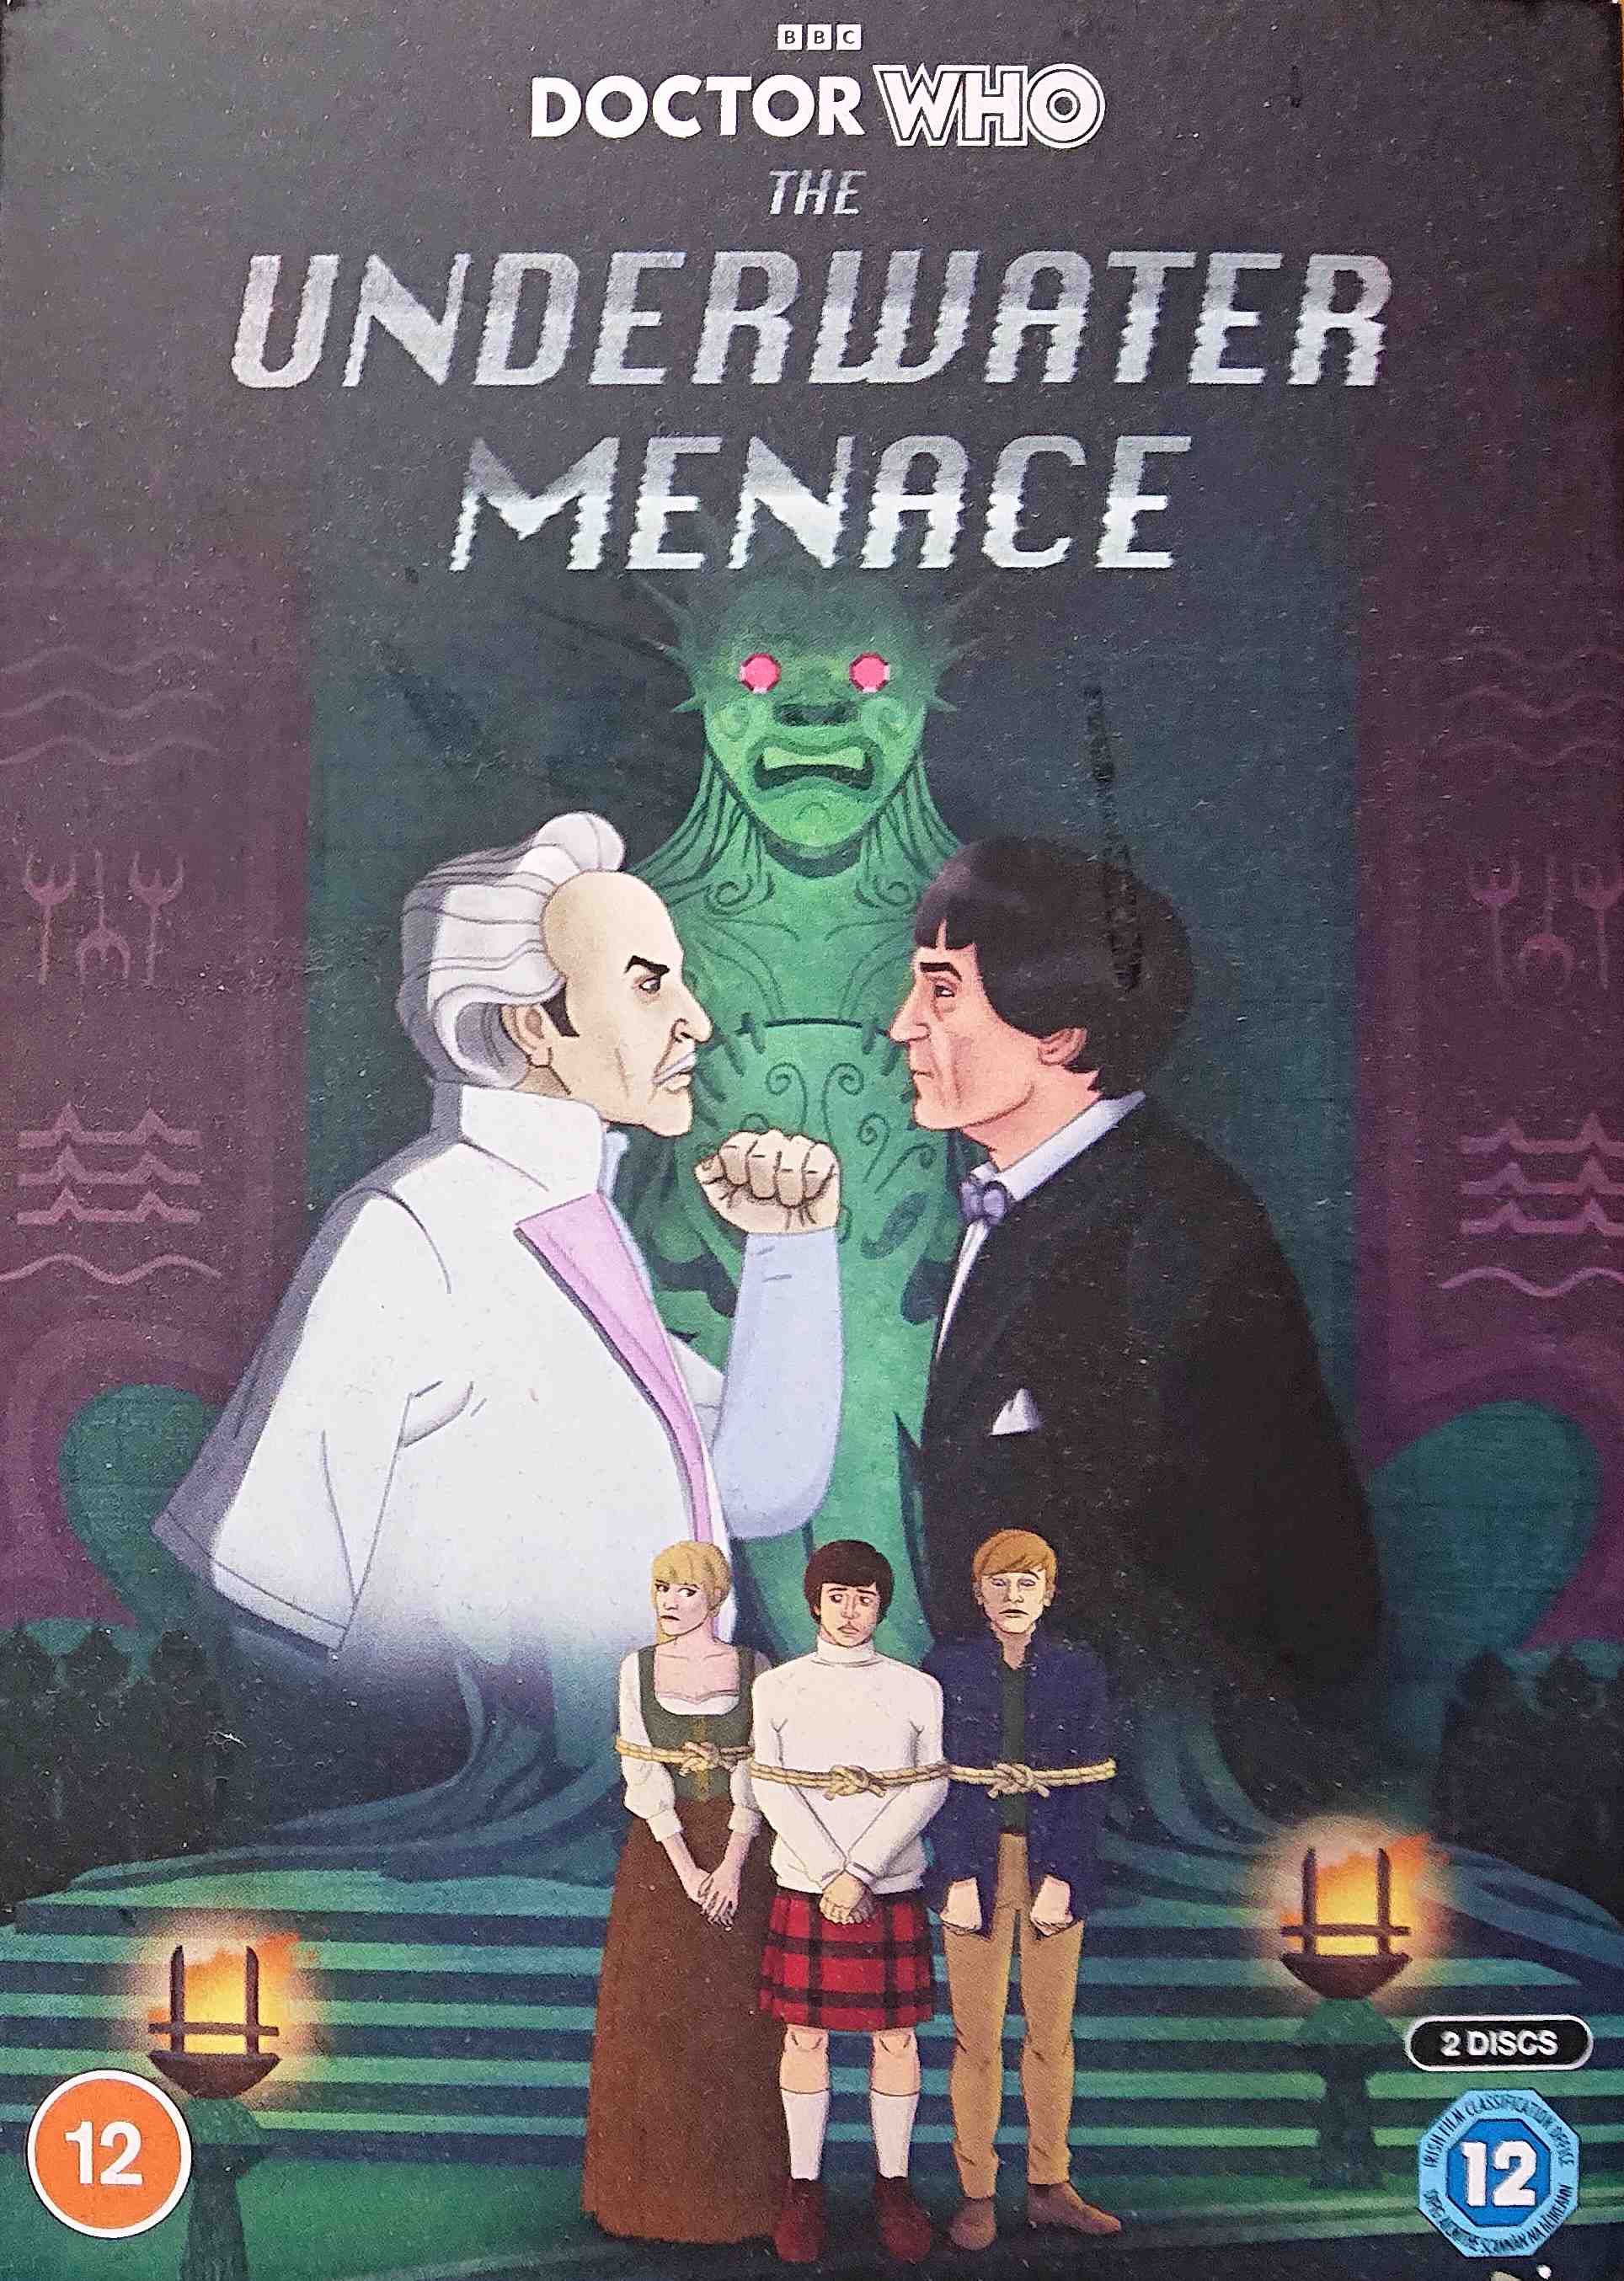 Picture of BBCDVD 4560 Doctor Who - The underwater menace by artist Geoffrey Orme from the BBC records and Tapes library